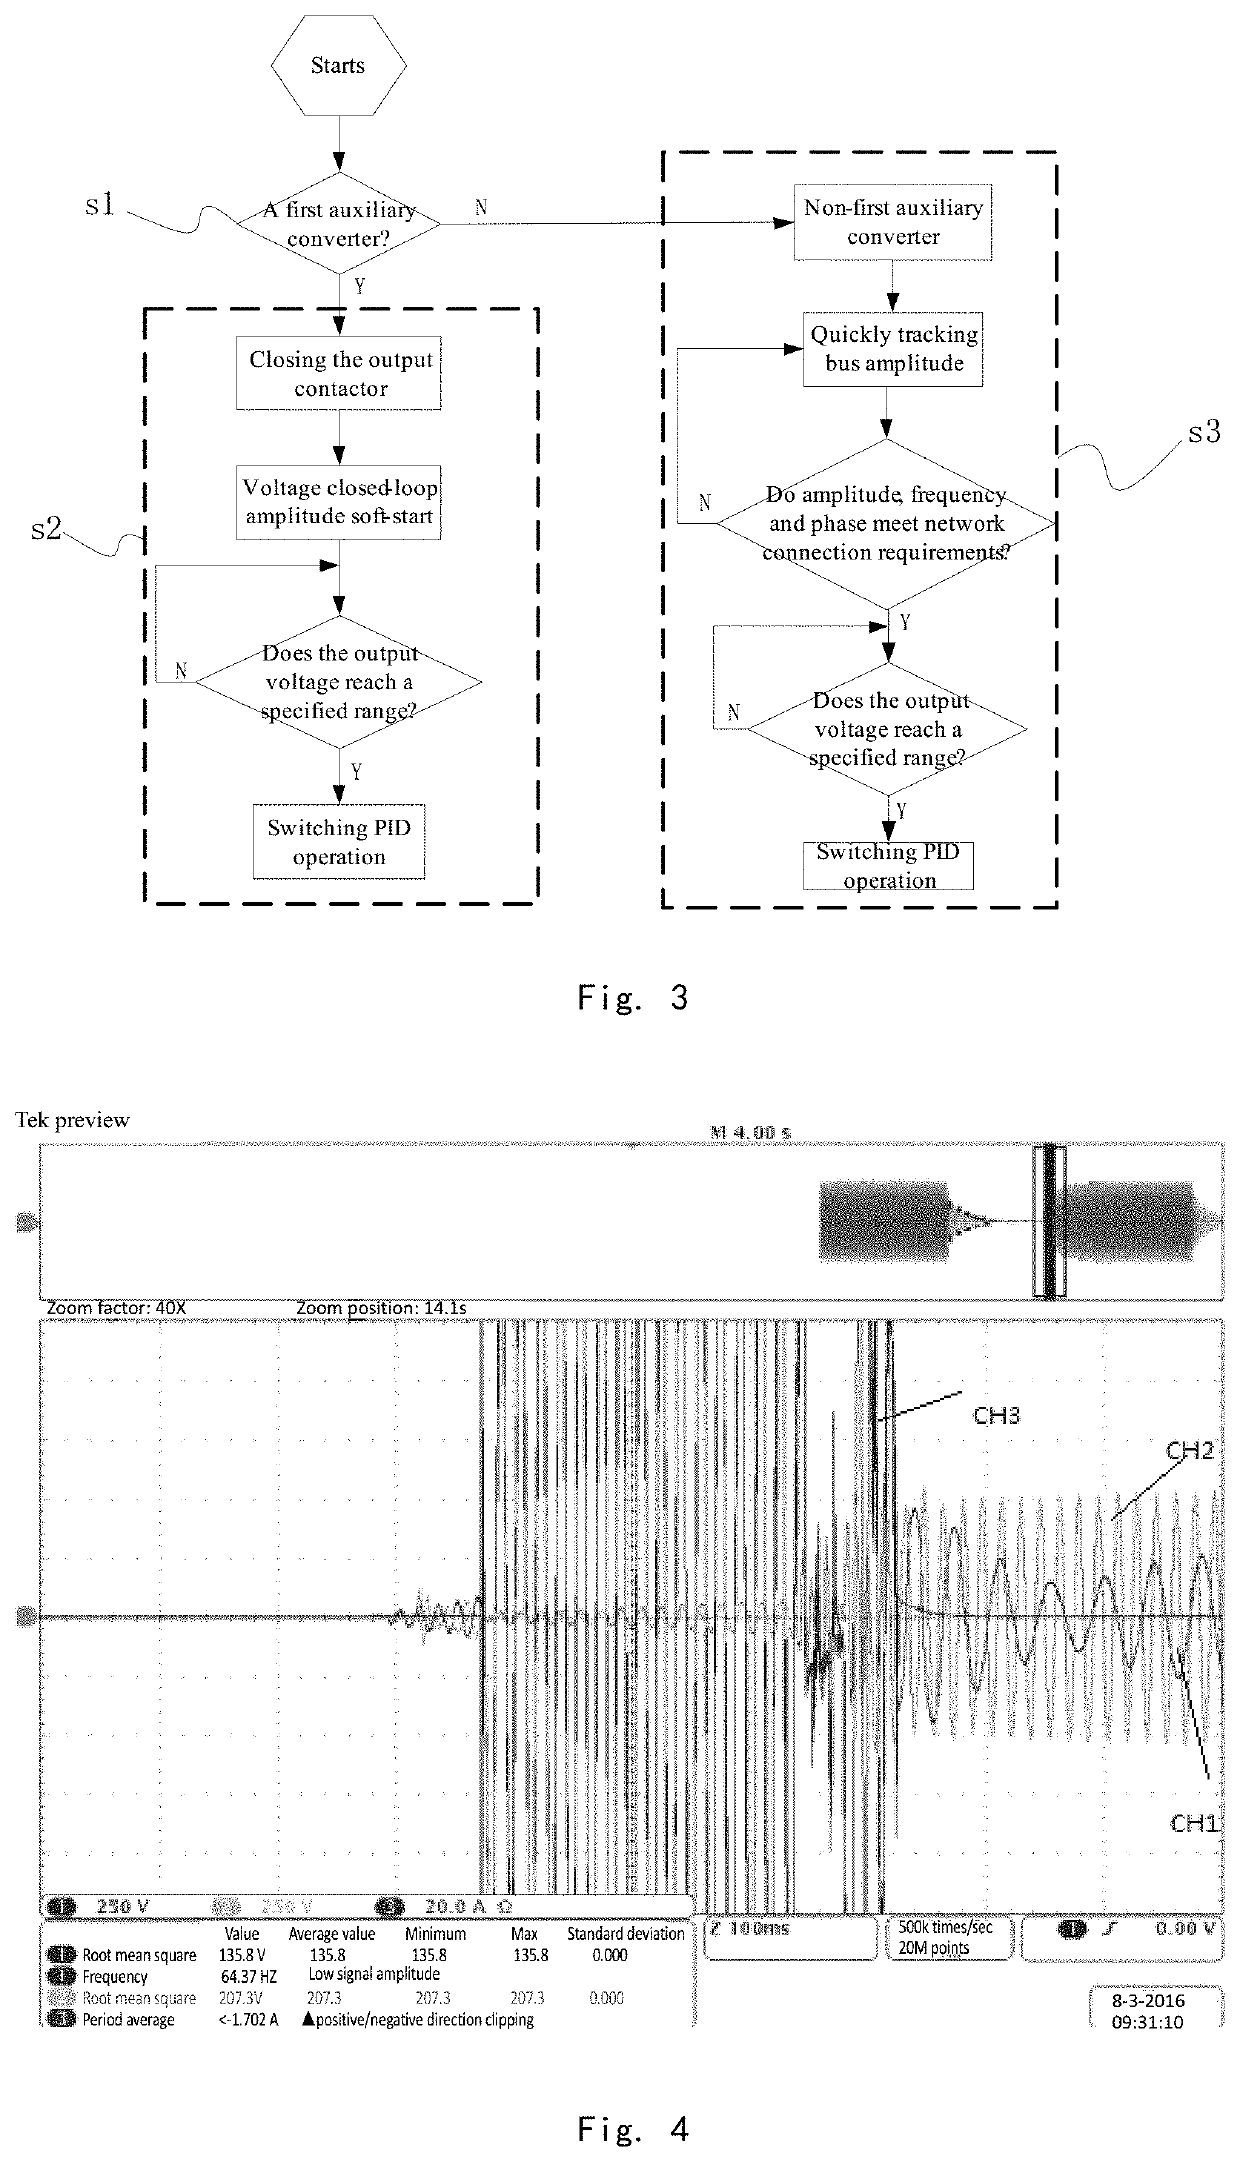 Synchronous soft-start networking control strategy for parallel auxiliary converters of emu